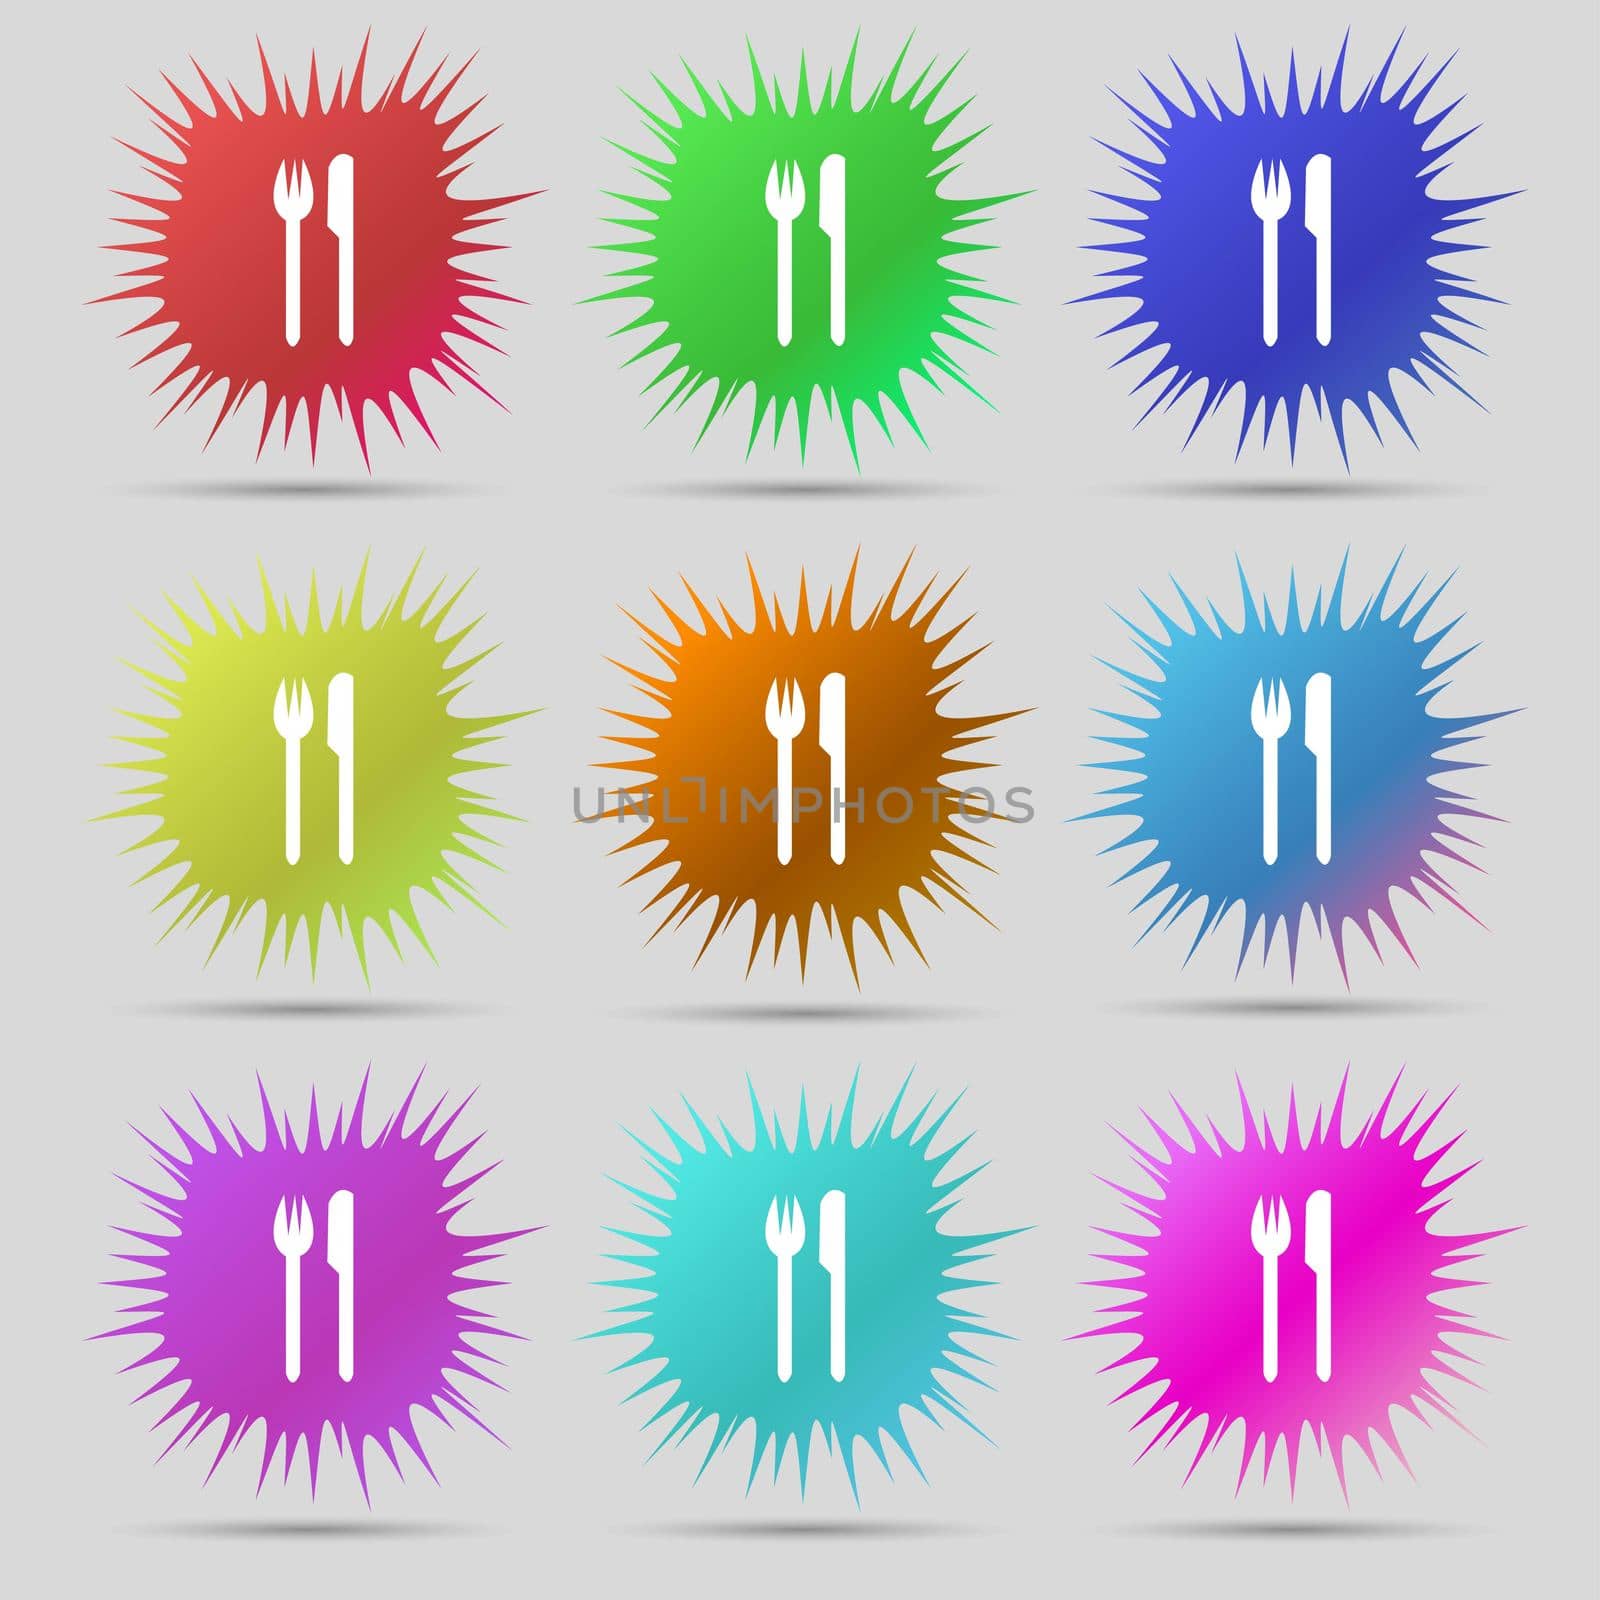 Eat sign icon. Cutlery symbol. Fork and knife. Nine original needle buttons. illustration. Raster version